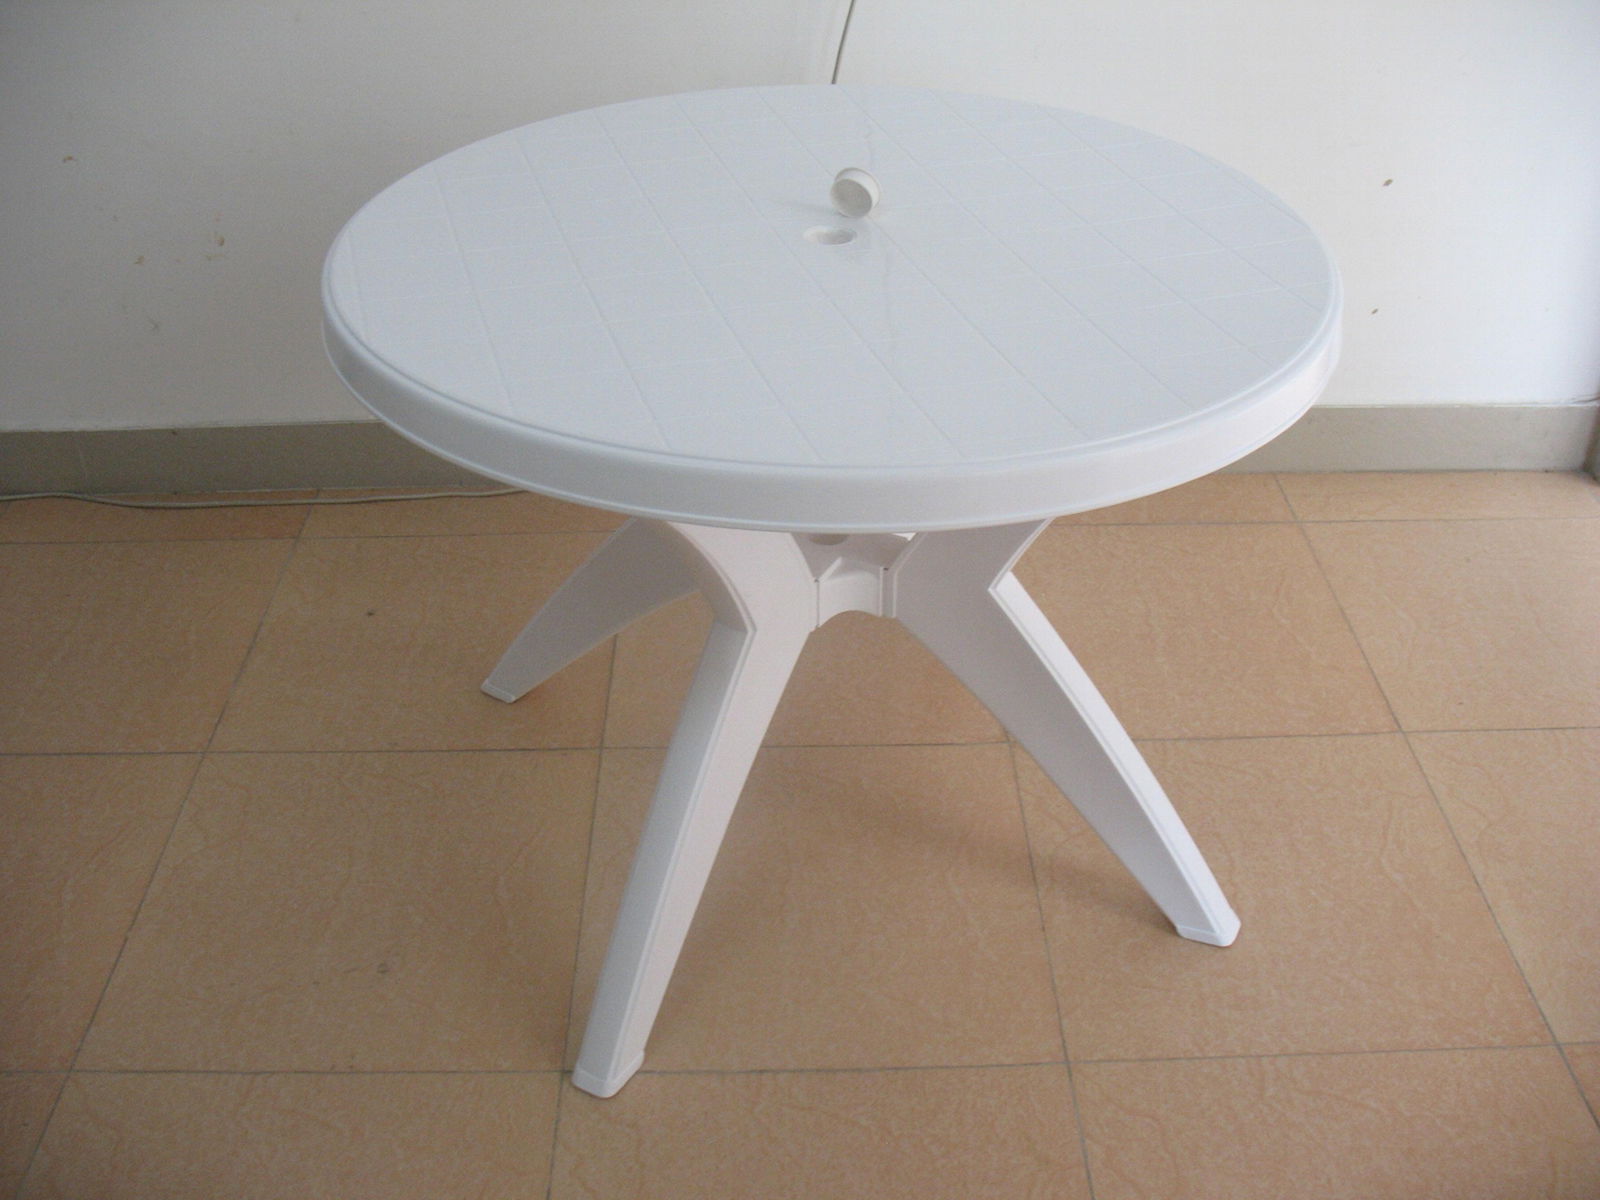 plastic round table A0056 3